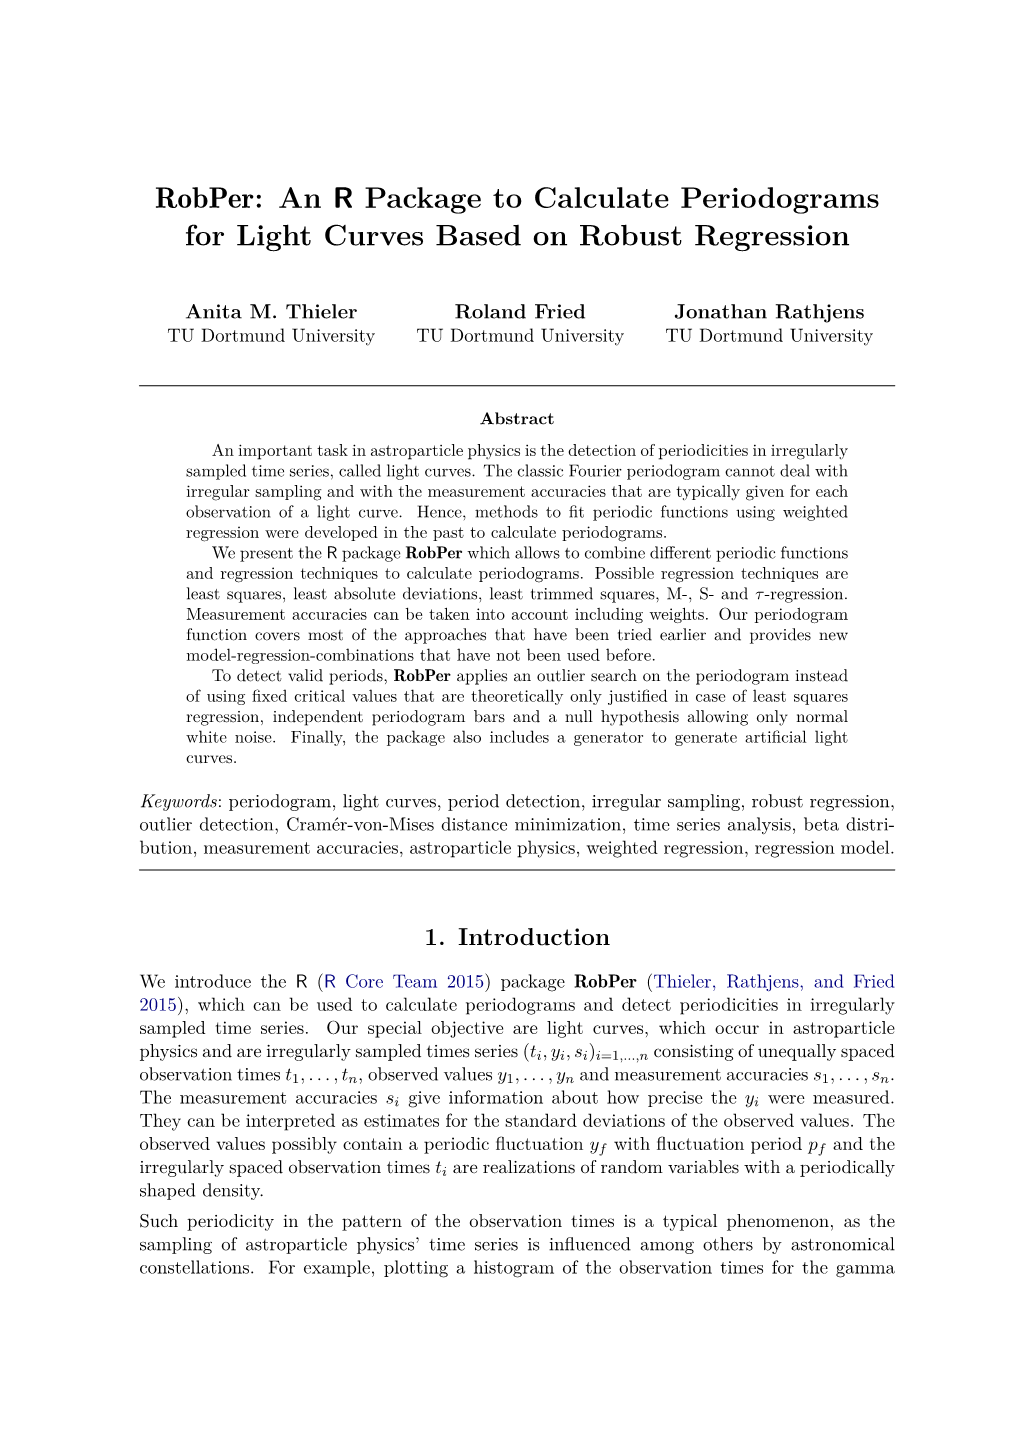 Robper: an R Package to Calculate Periodograms for Light Curves Based on Robust Regression